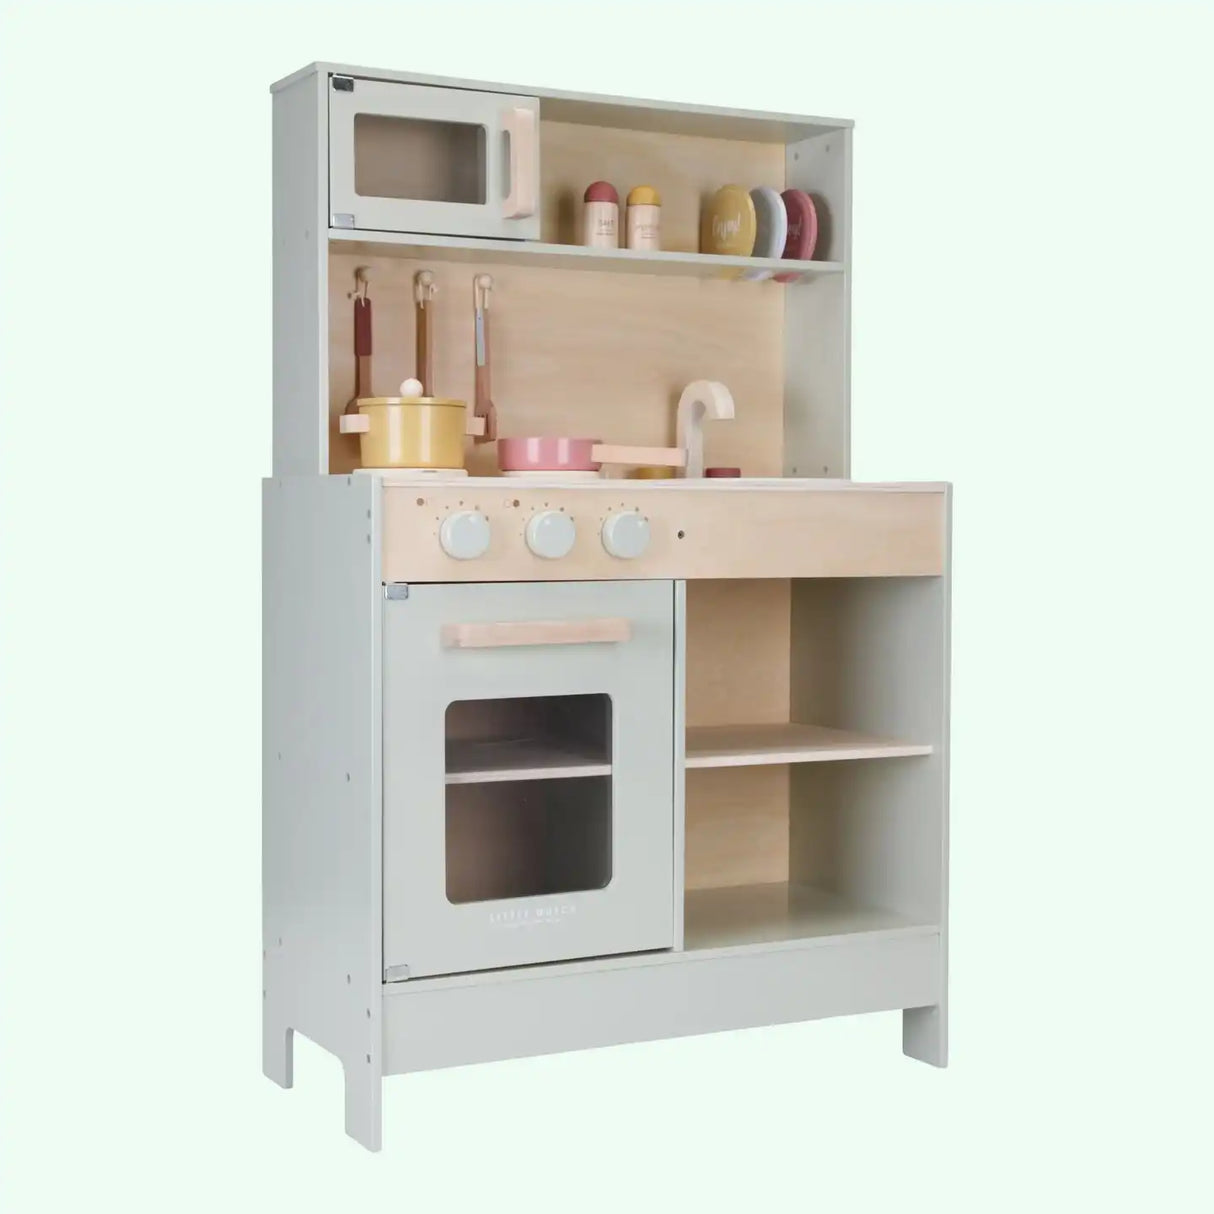 Wooden Play Kitchen in Mint